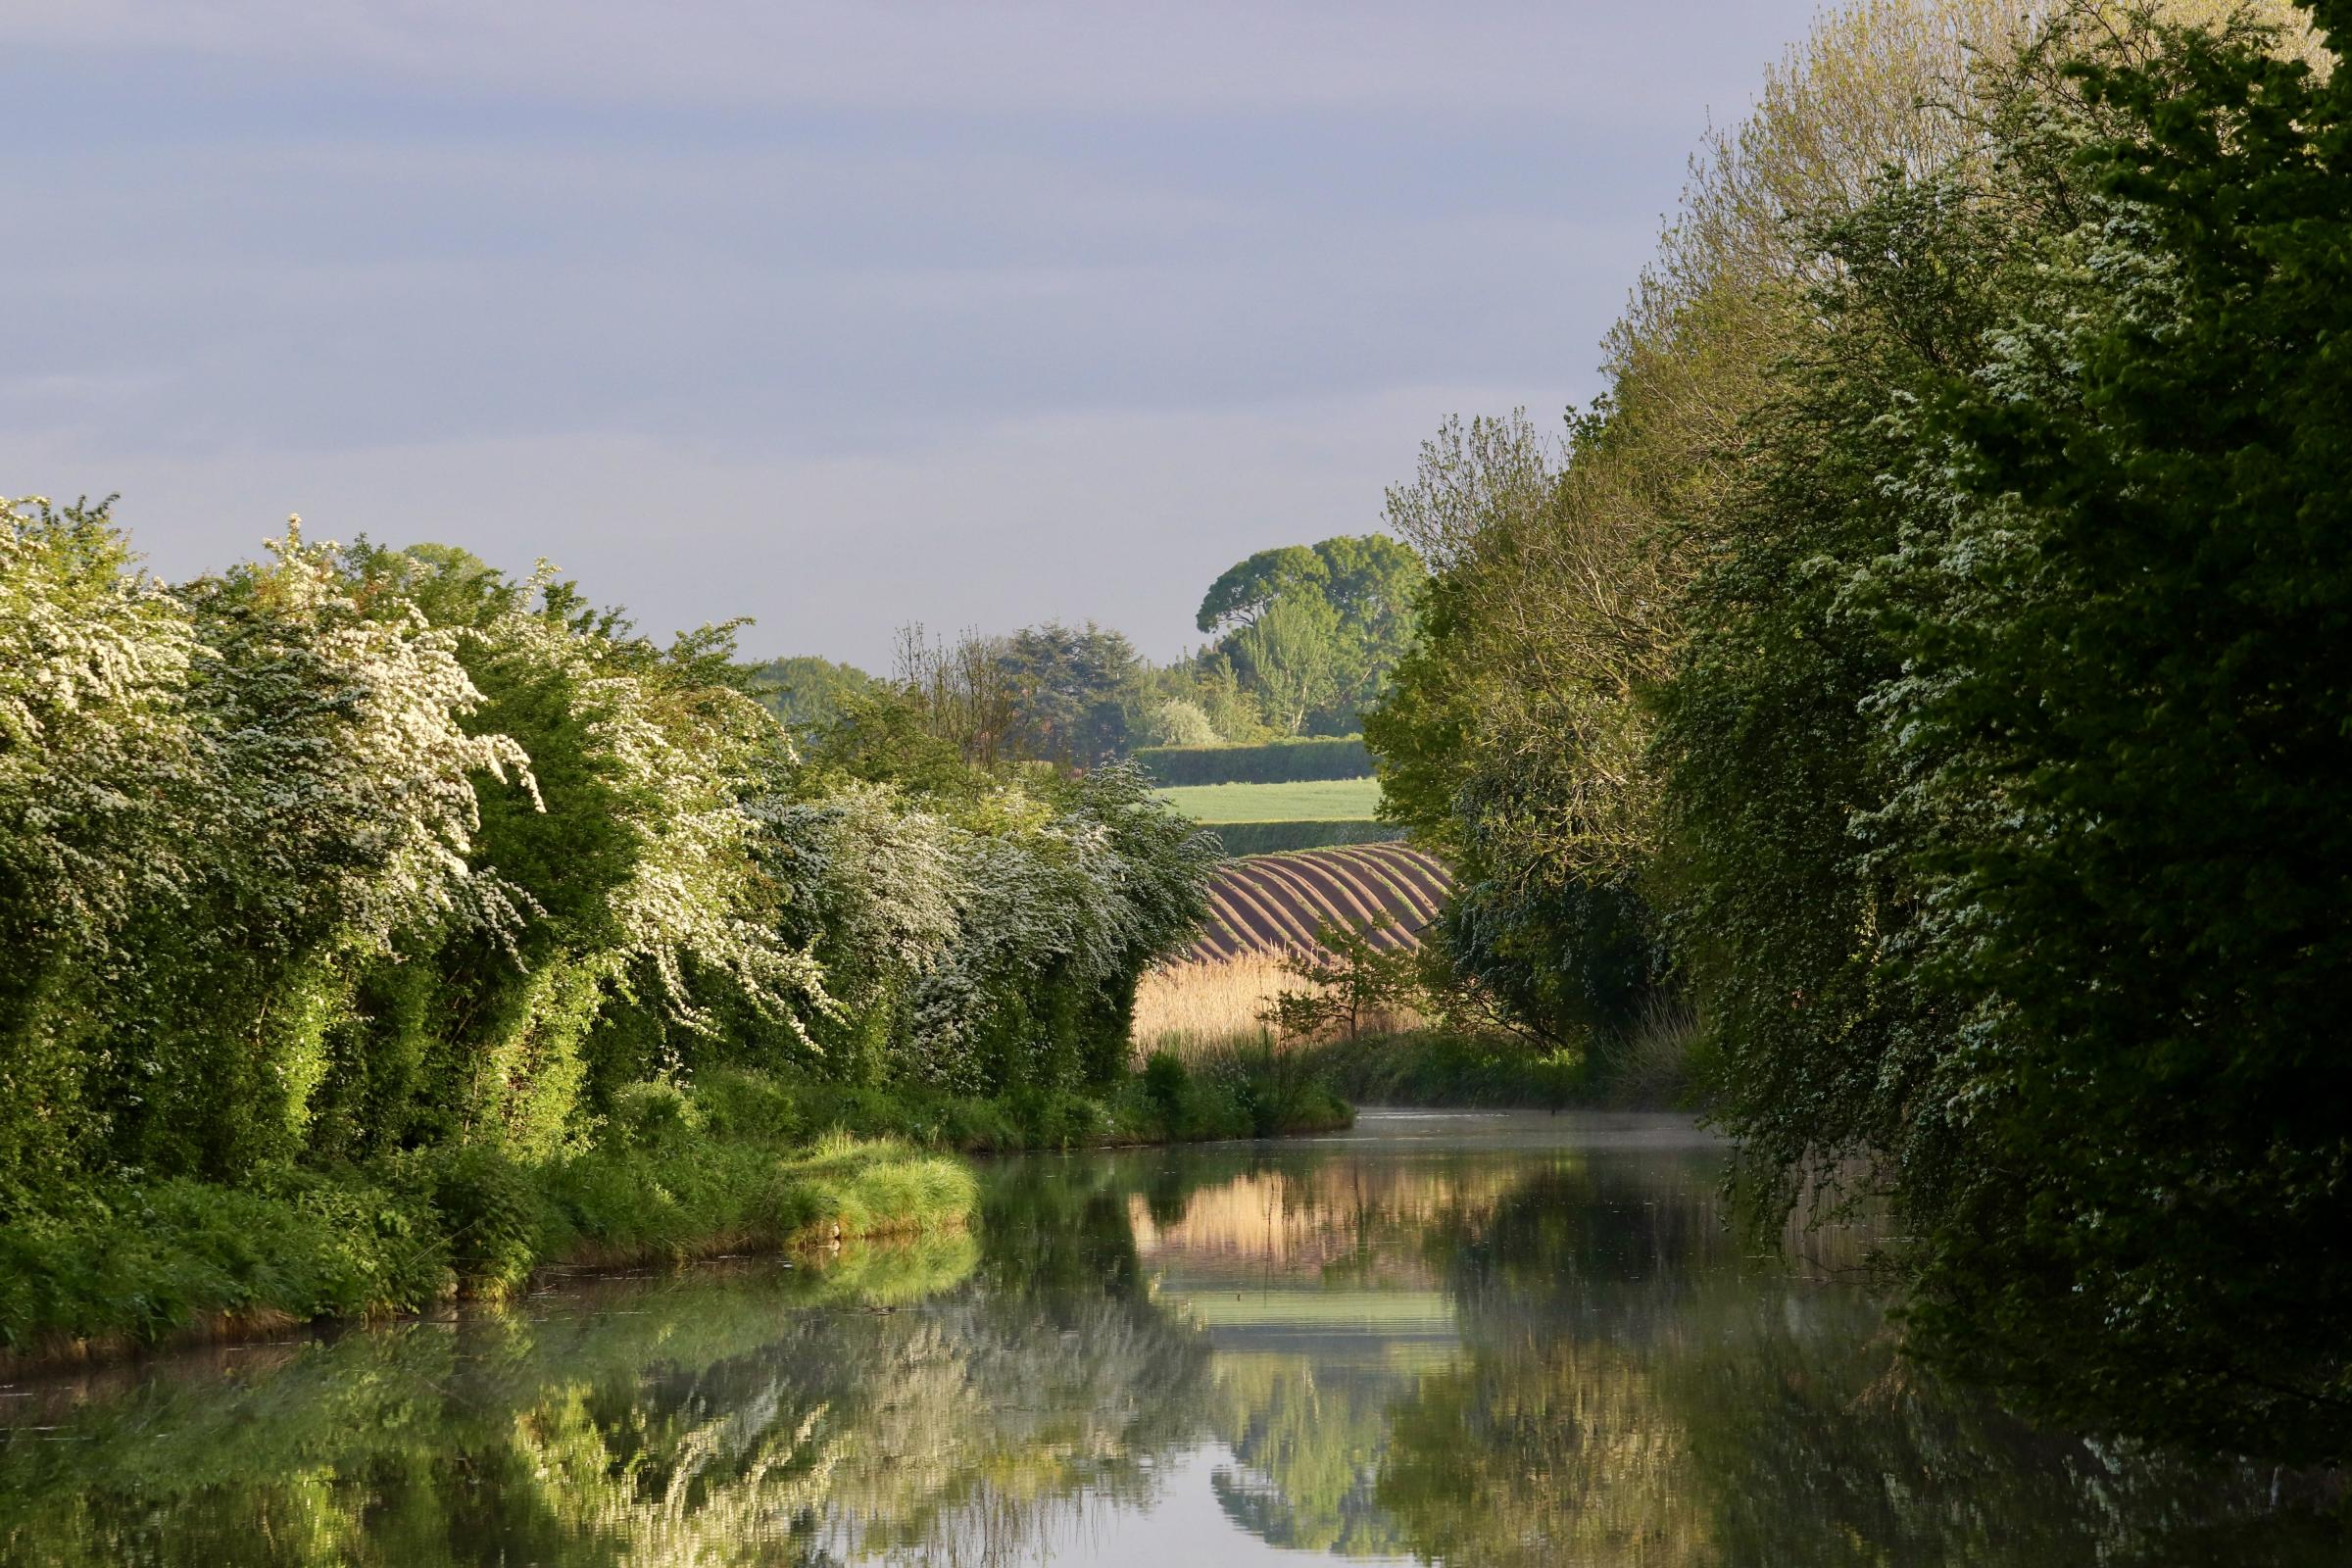 Early morning on the Trent Mersey Canal near Acton Bridge